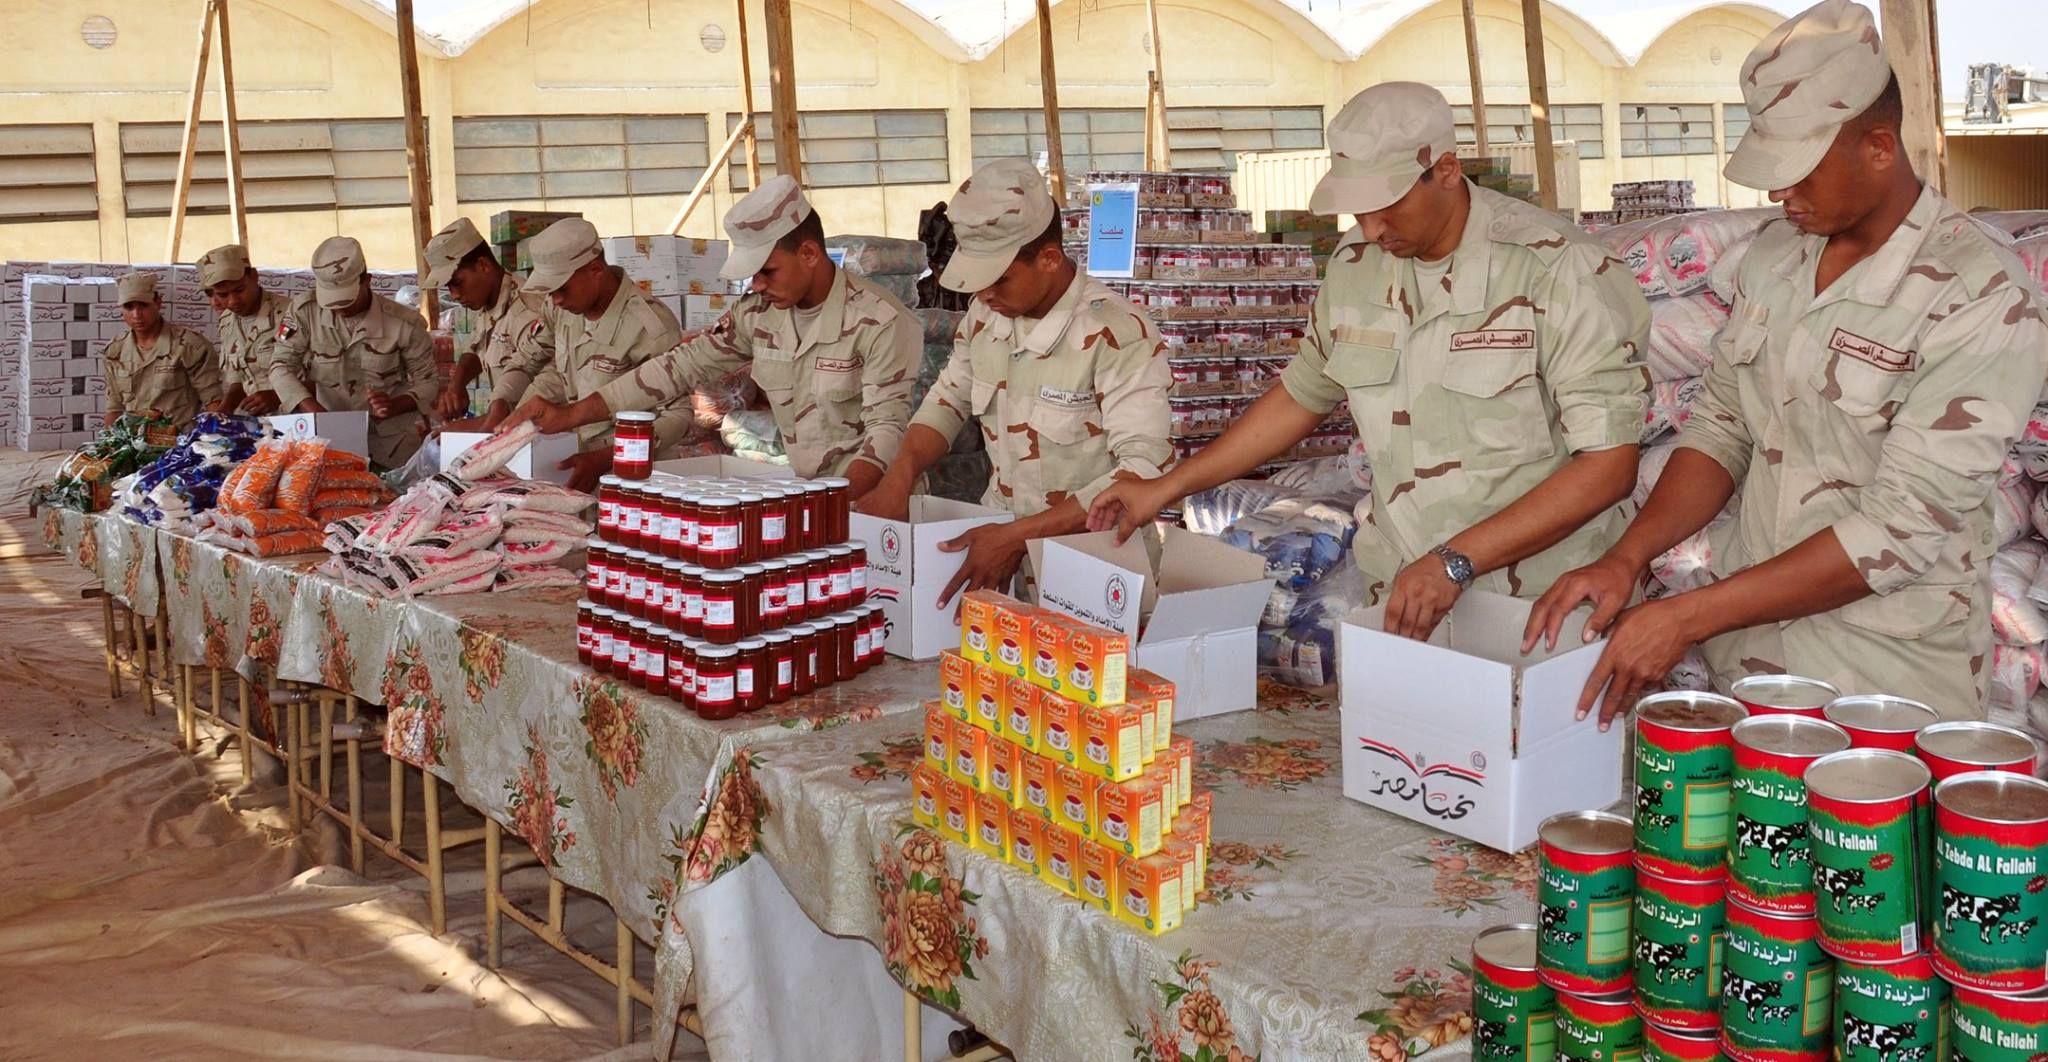 Army soldiers preparing food pack as a step intended to overcome economic hardships (Photo courtesy of Egypt's Army spokesman page on Facebook)